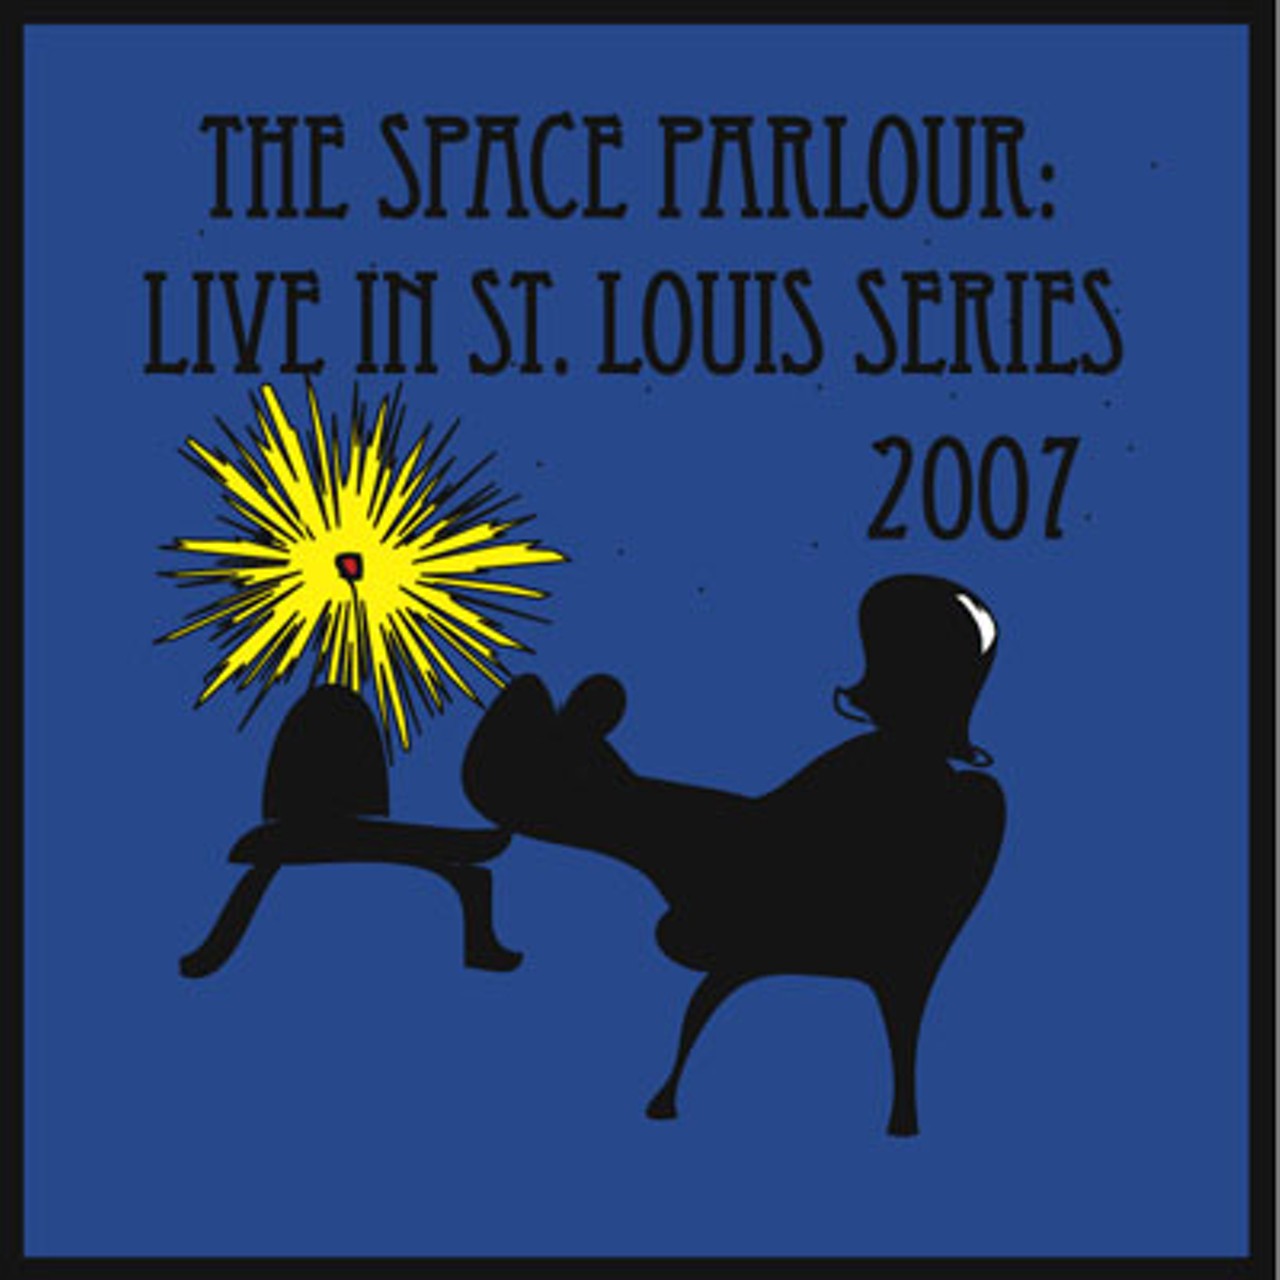 Best Local Release (self-released)
Space Parlour: Live in 
St. Louis Series 2007
By compiling songs from artists specializing in folk (Casey Reid), punk (Ded Bugs) and rock (That&rsquo;s My Daughter), Nick Acquisto&rsquo;s comp serves as a document of St. Louis talent &mdash; as well as a tip sheet for many of this city&rsquo;s best bands. &mdash; Christian Schaeffer